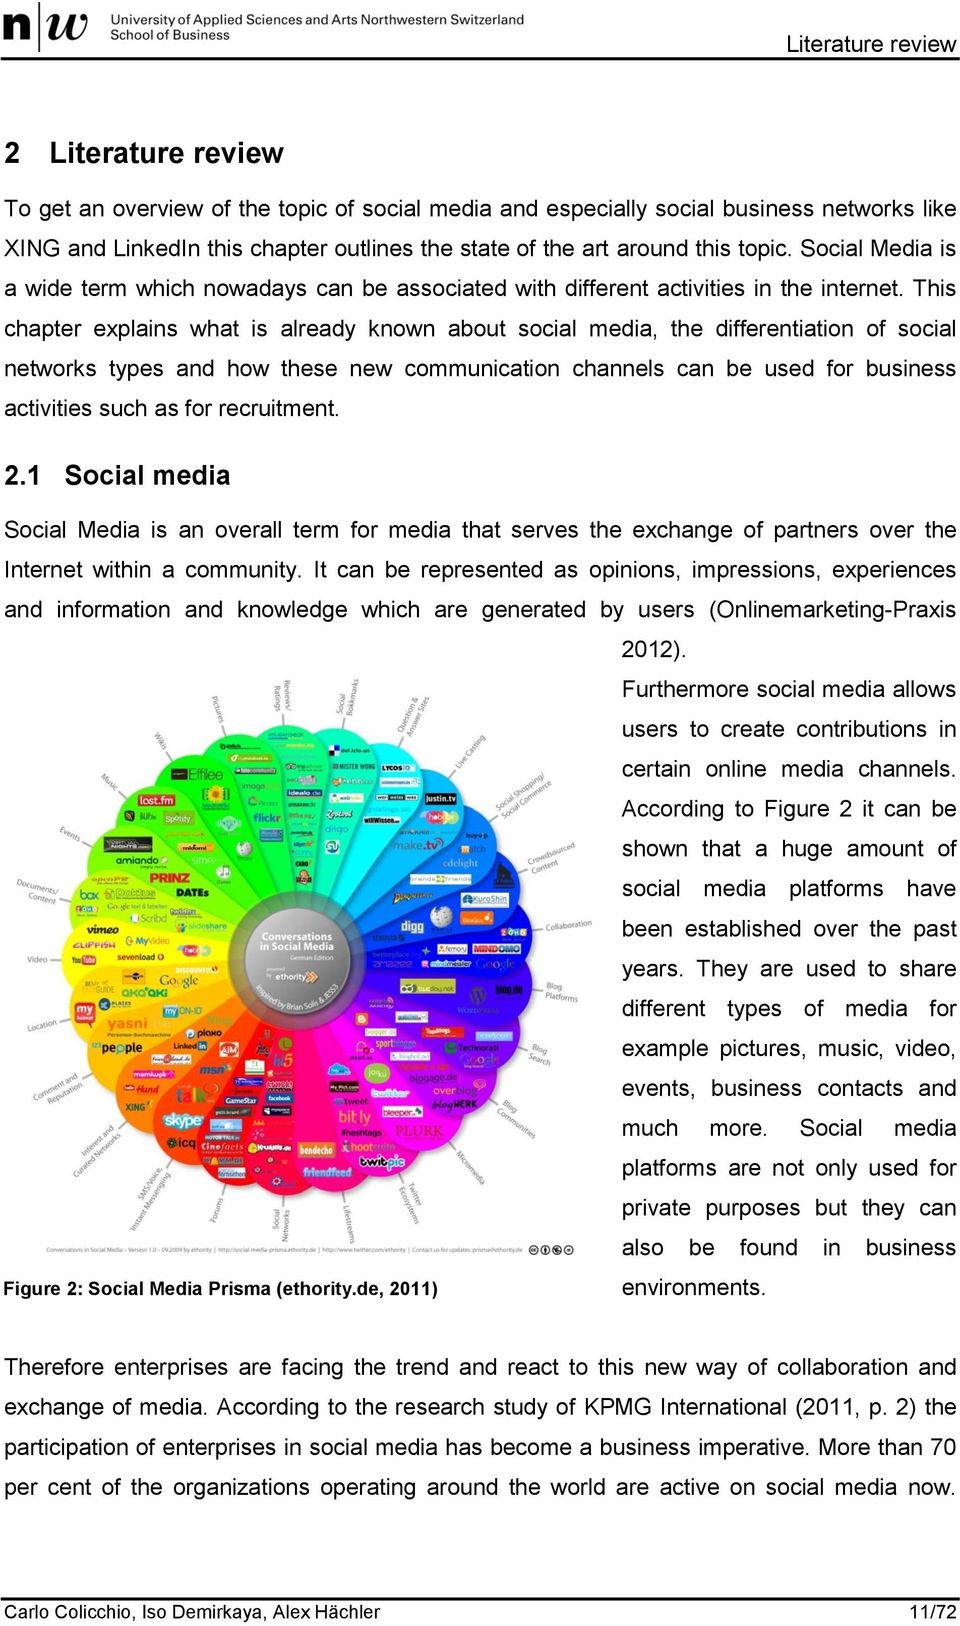 This chapter explains what is already known about social media, the differentiation of social networks types and how these new communication channels can be used for business activities such as for